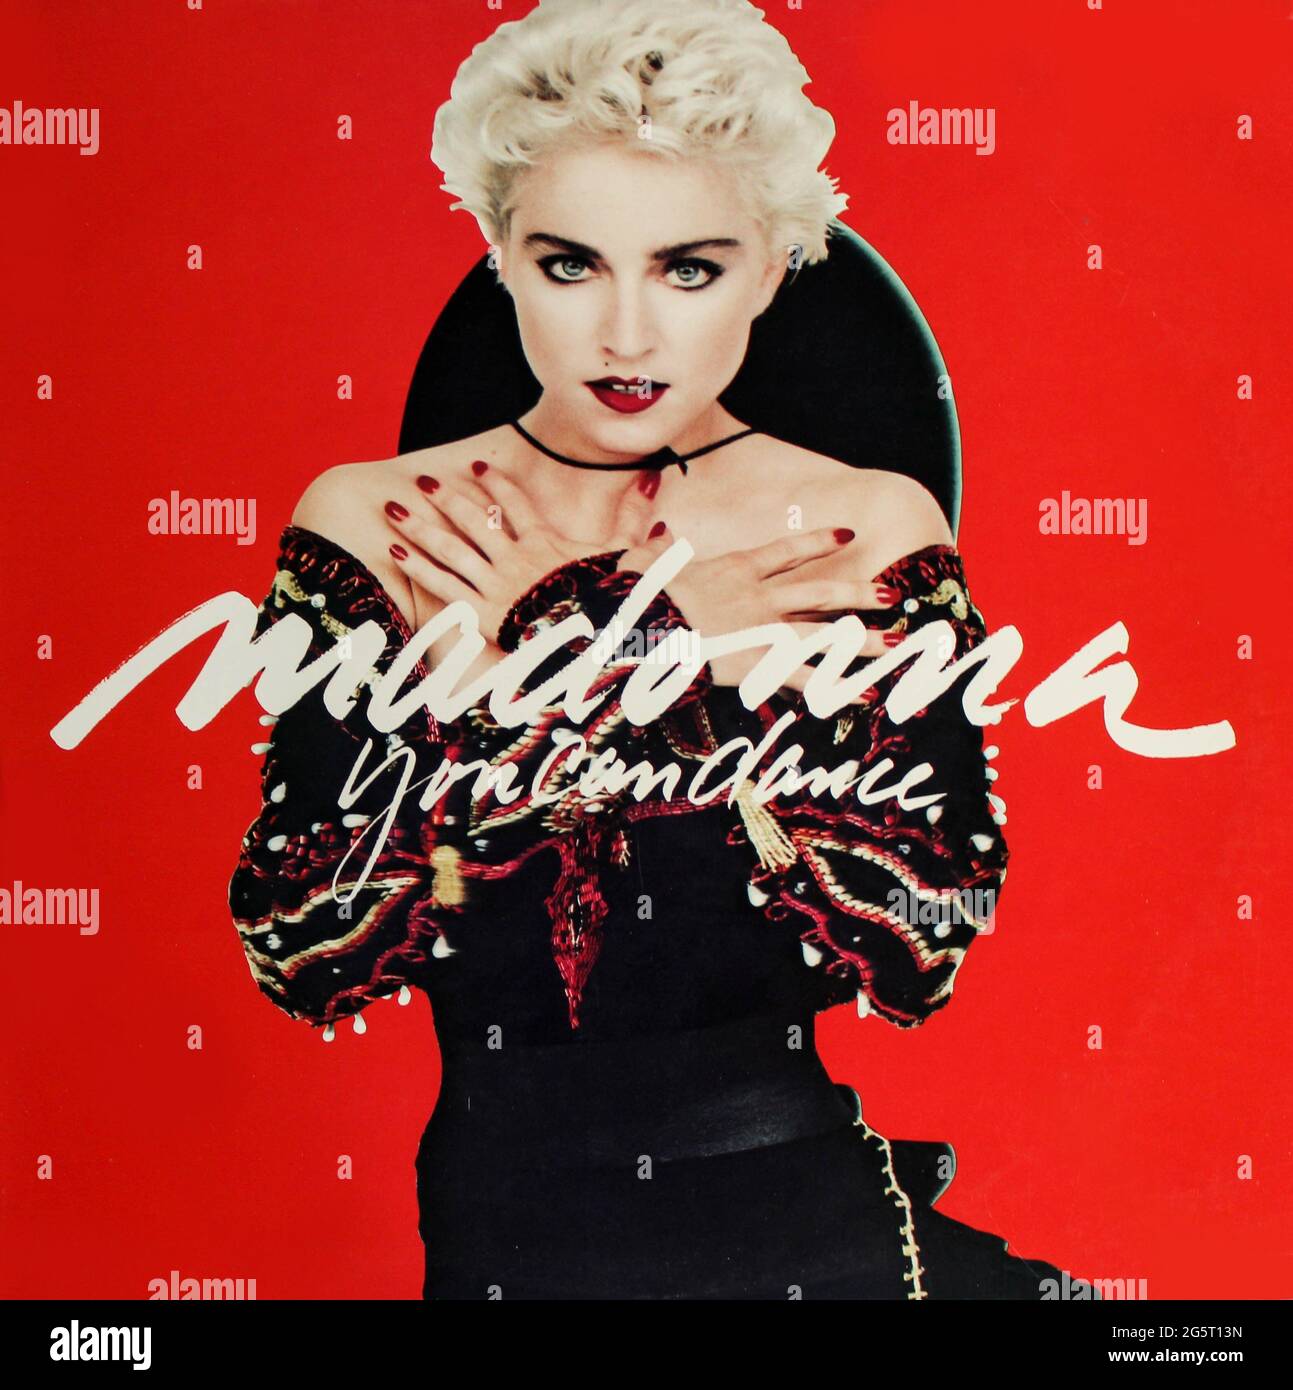 Pop and House dance artist, Madonna remix music album on vinyl record LP disc. Titled: You can dance album cover Stock Photo